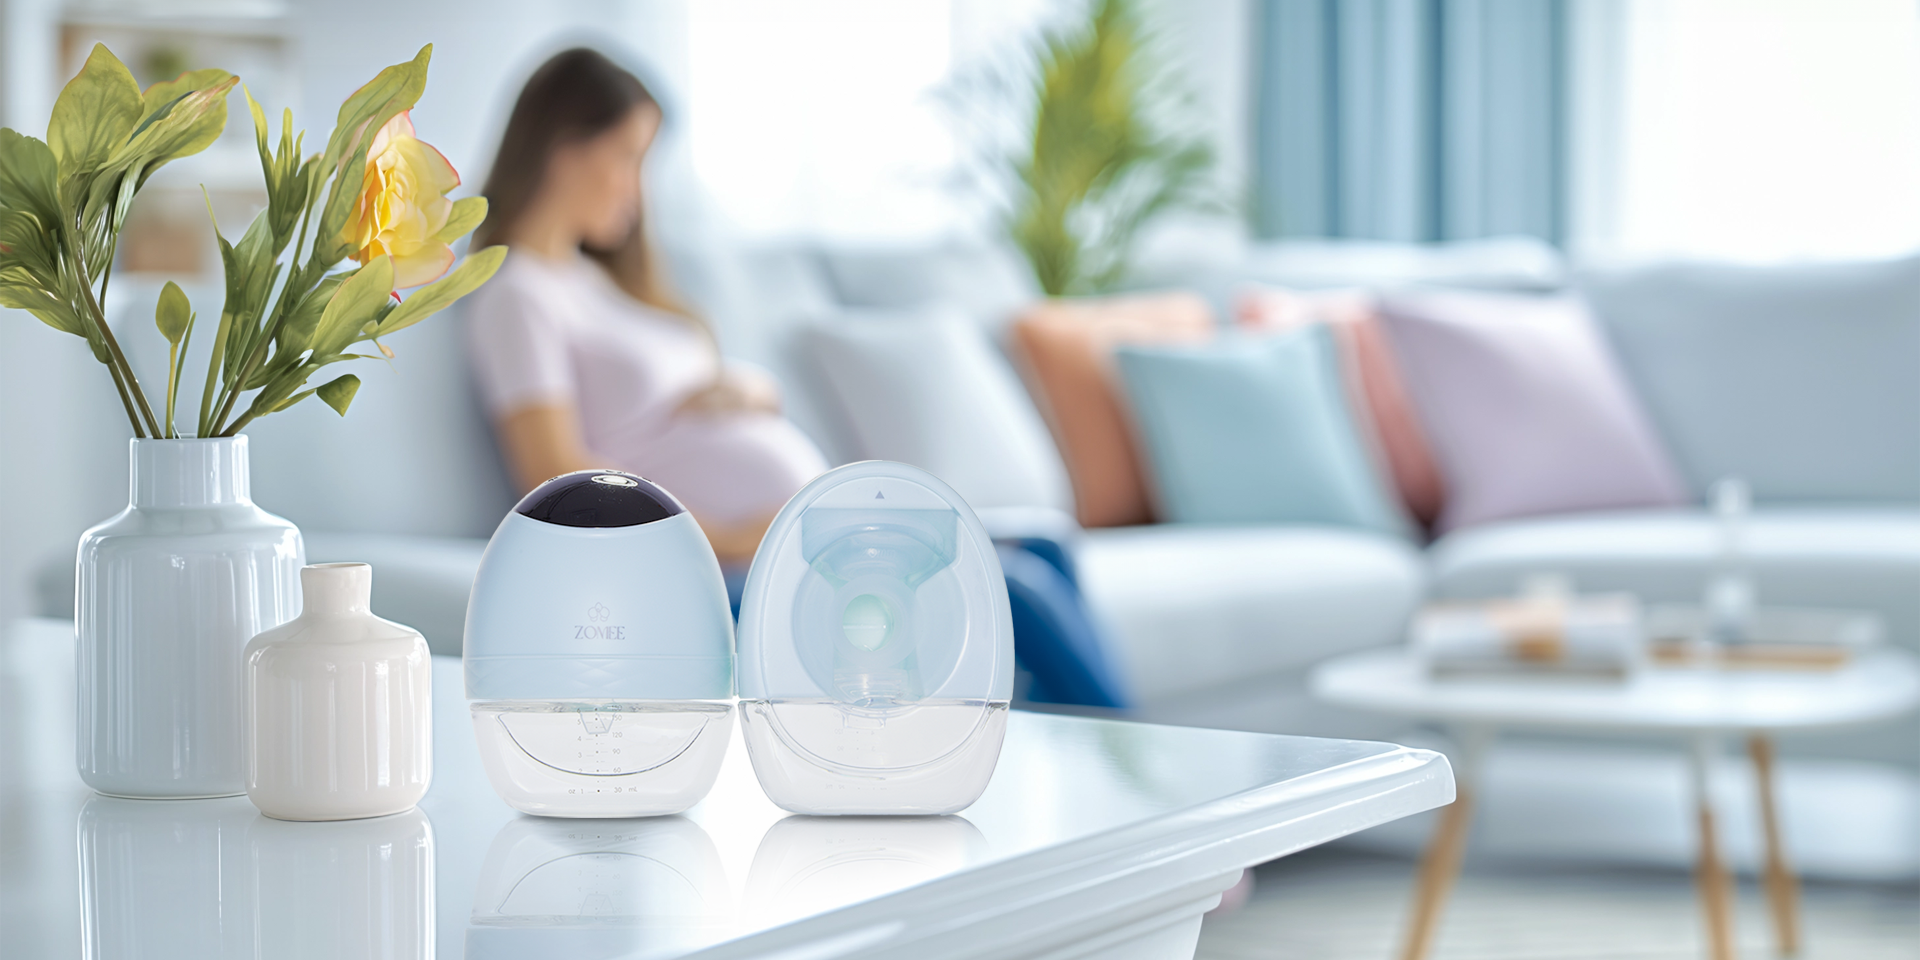 The Zomee Fit Hands-free Breast Pump provides unmatched pumping comfort